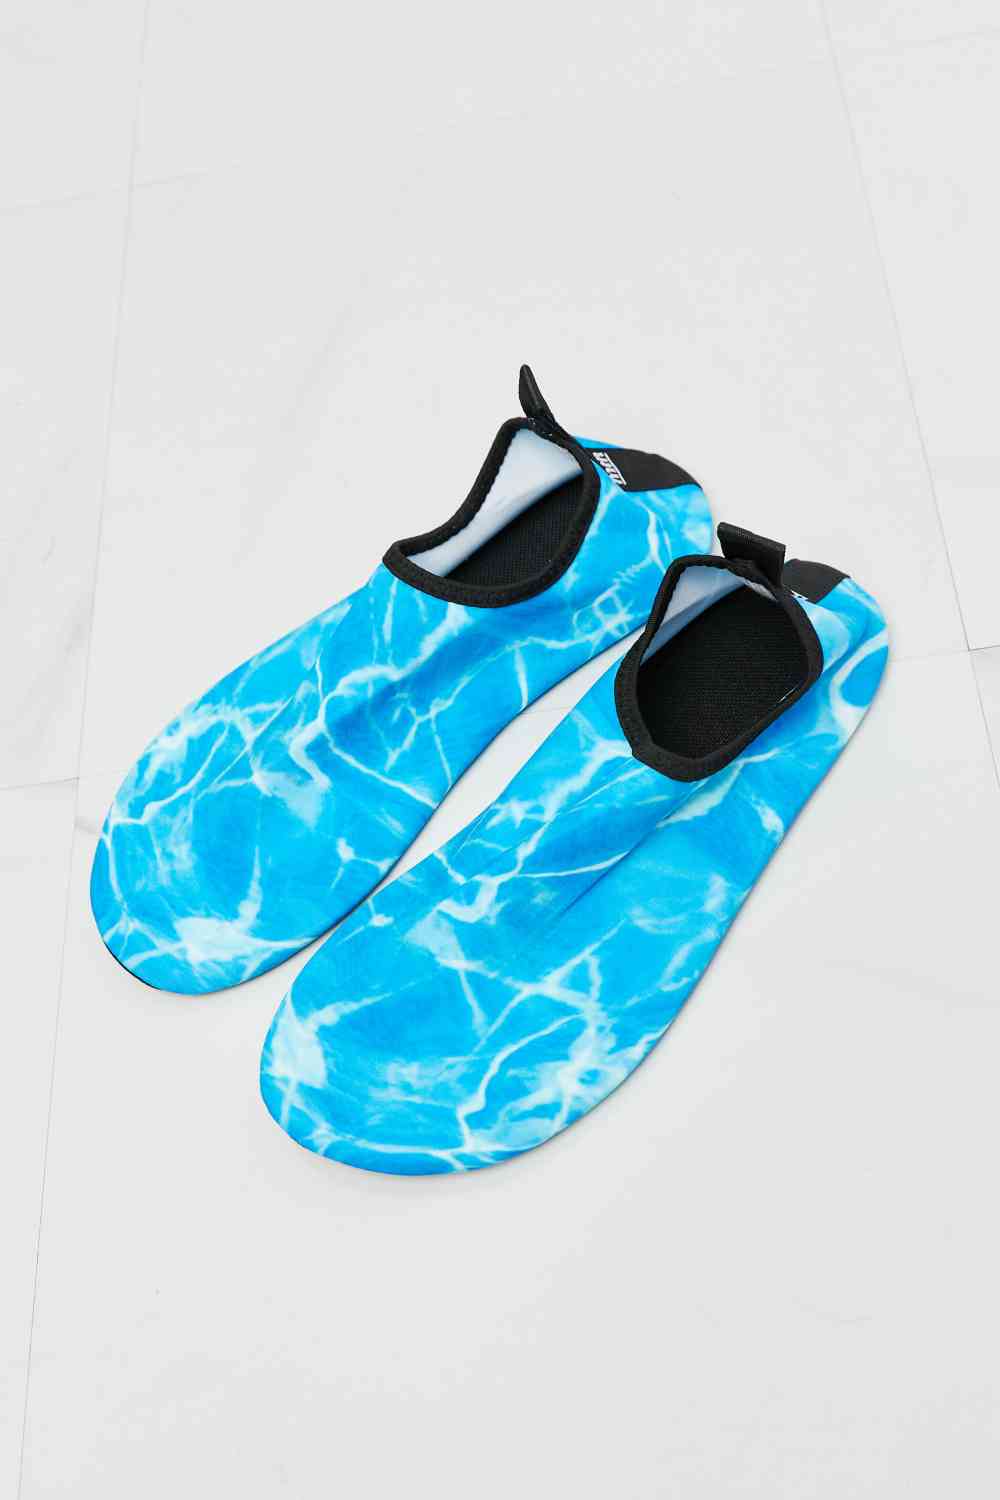 On The Shore Water Shoes in Sky Blue - Kawaii Stop - Aqua Footwear, Beach Adventures, Beach Days, Comfortable Shoes, Durable Materials, Kayaking, Melody, Outdoor Activities, Rubber Sole, Safety First, Ship from USA, Sky Blue, Slip-Resistant, Swimming, Two-Tone Design, US Sizing, Water Protection, Water Shoes, Wet Surfaces